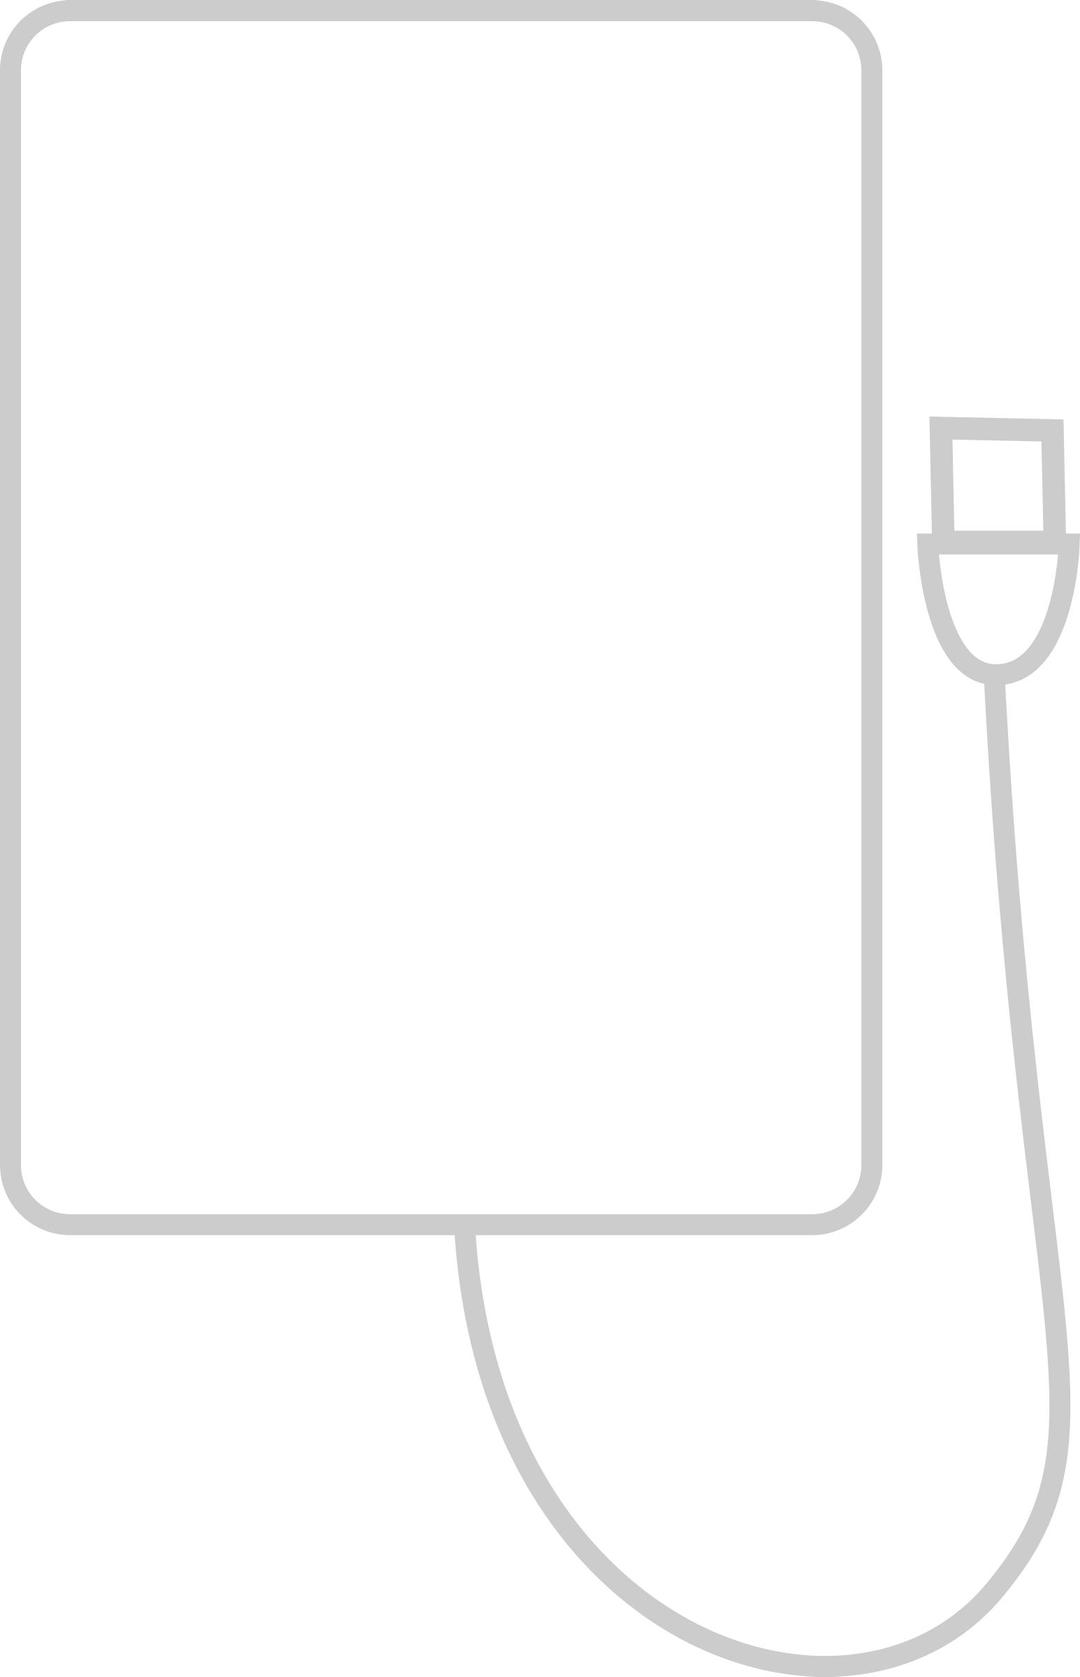 Hard Drive Icon png transparent